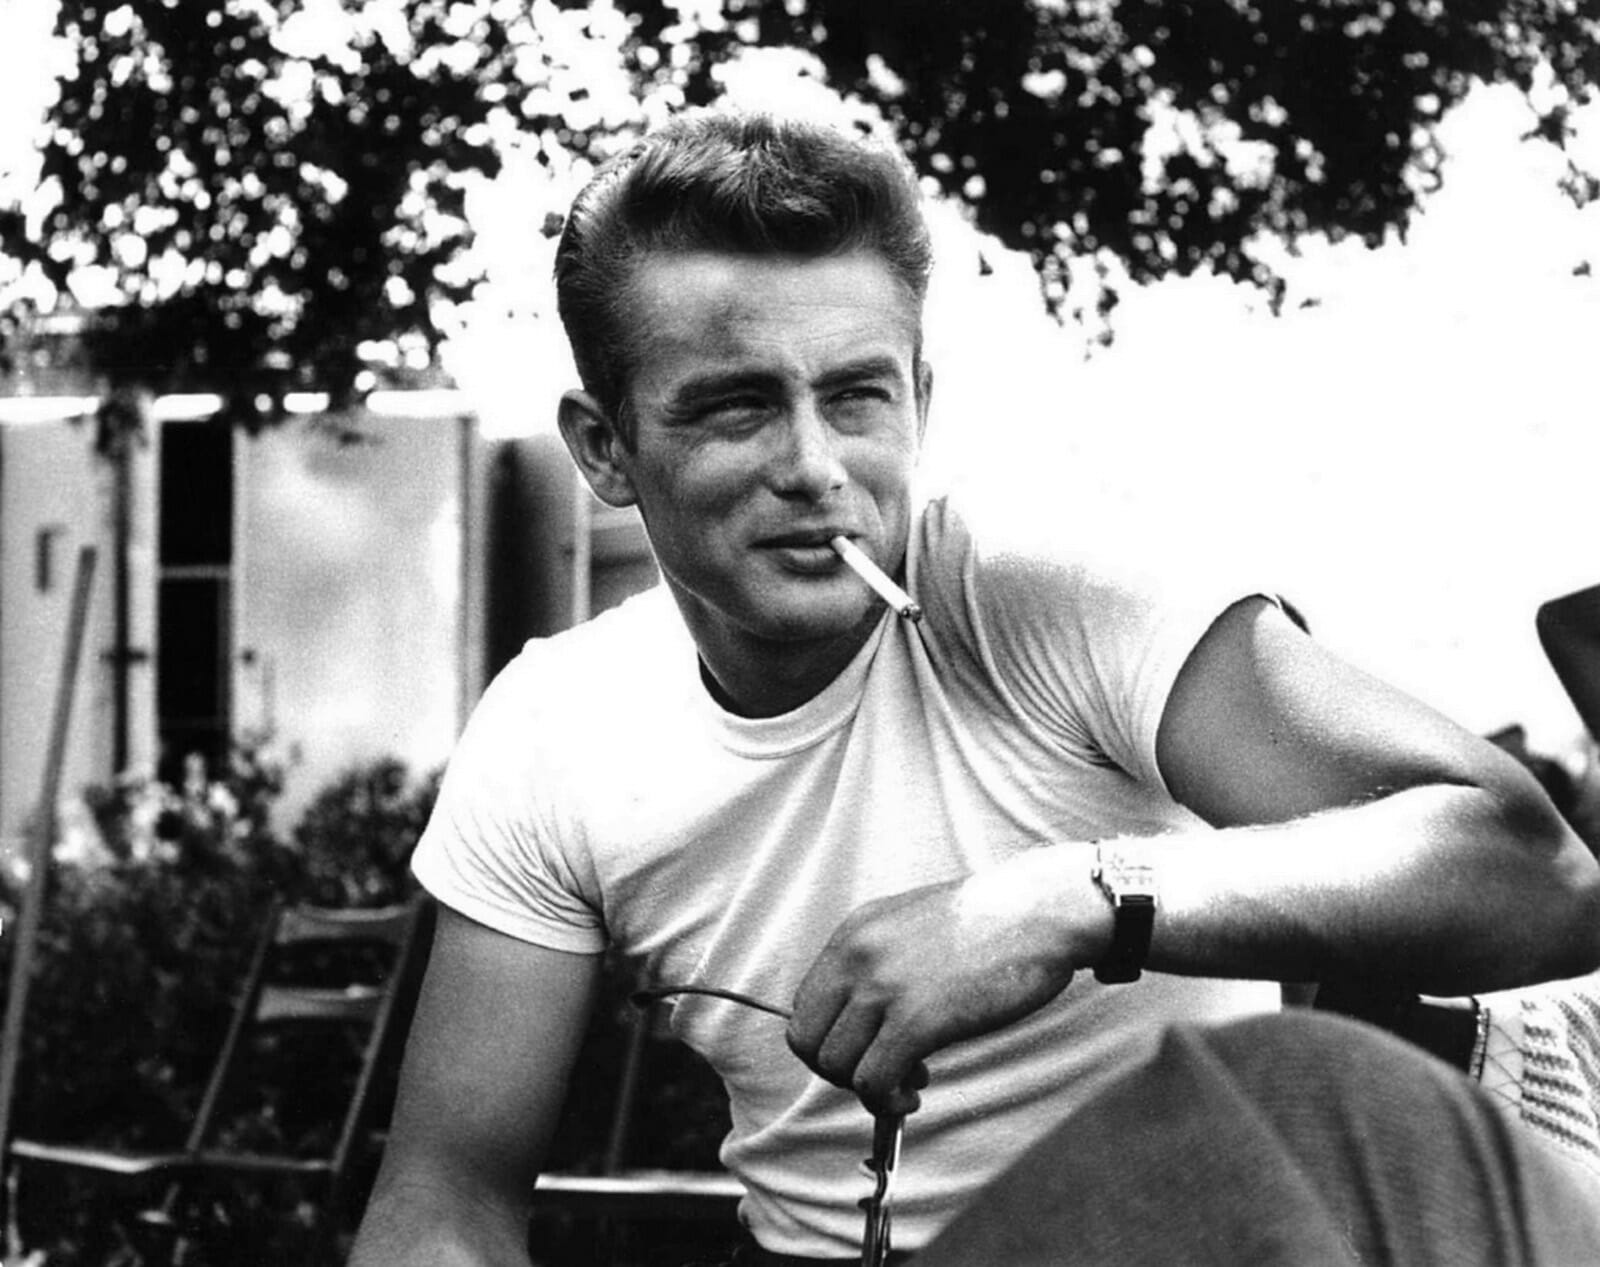 Dean on the set of Rebel Without a Cause, in a simple white T-shirt.